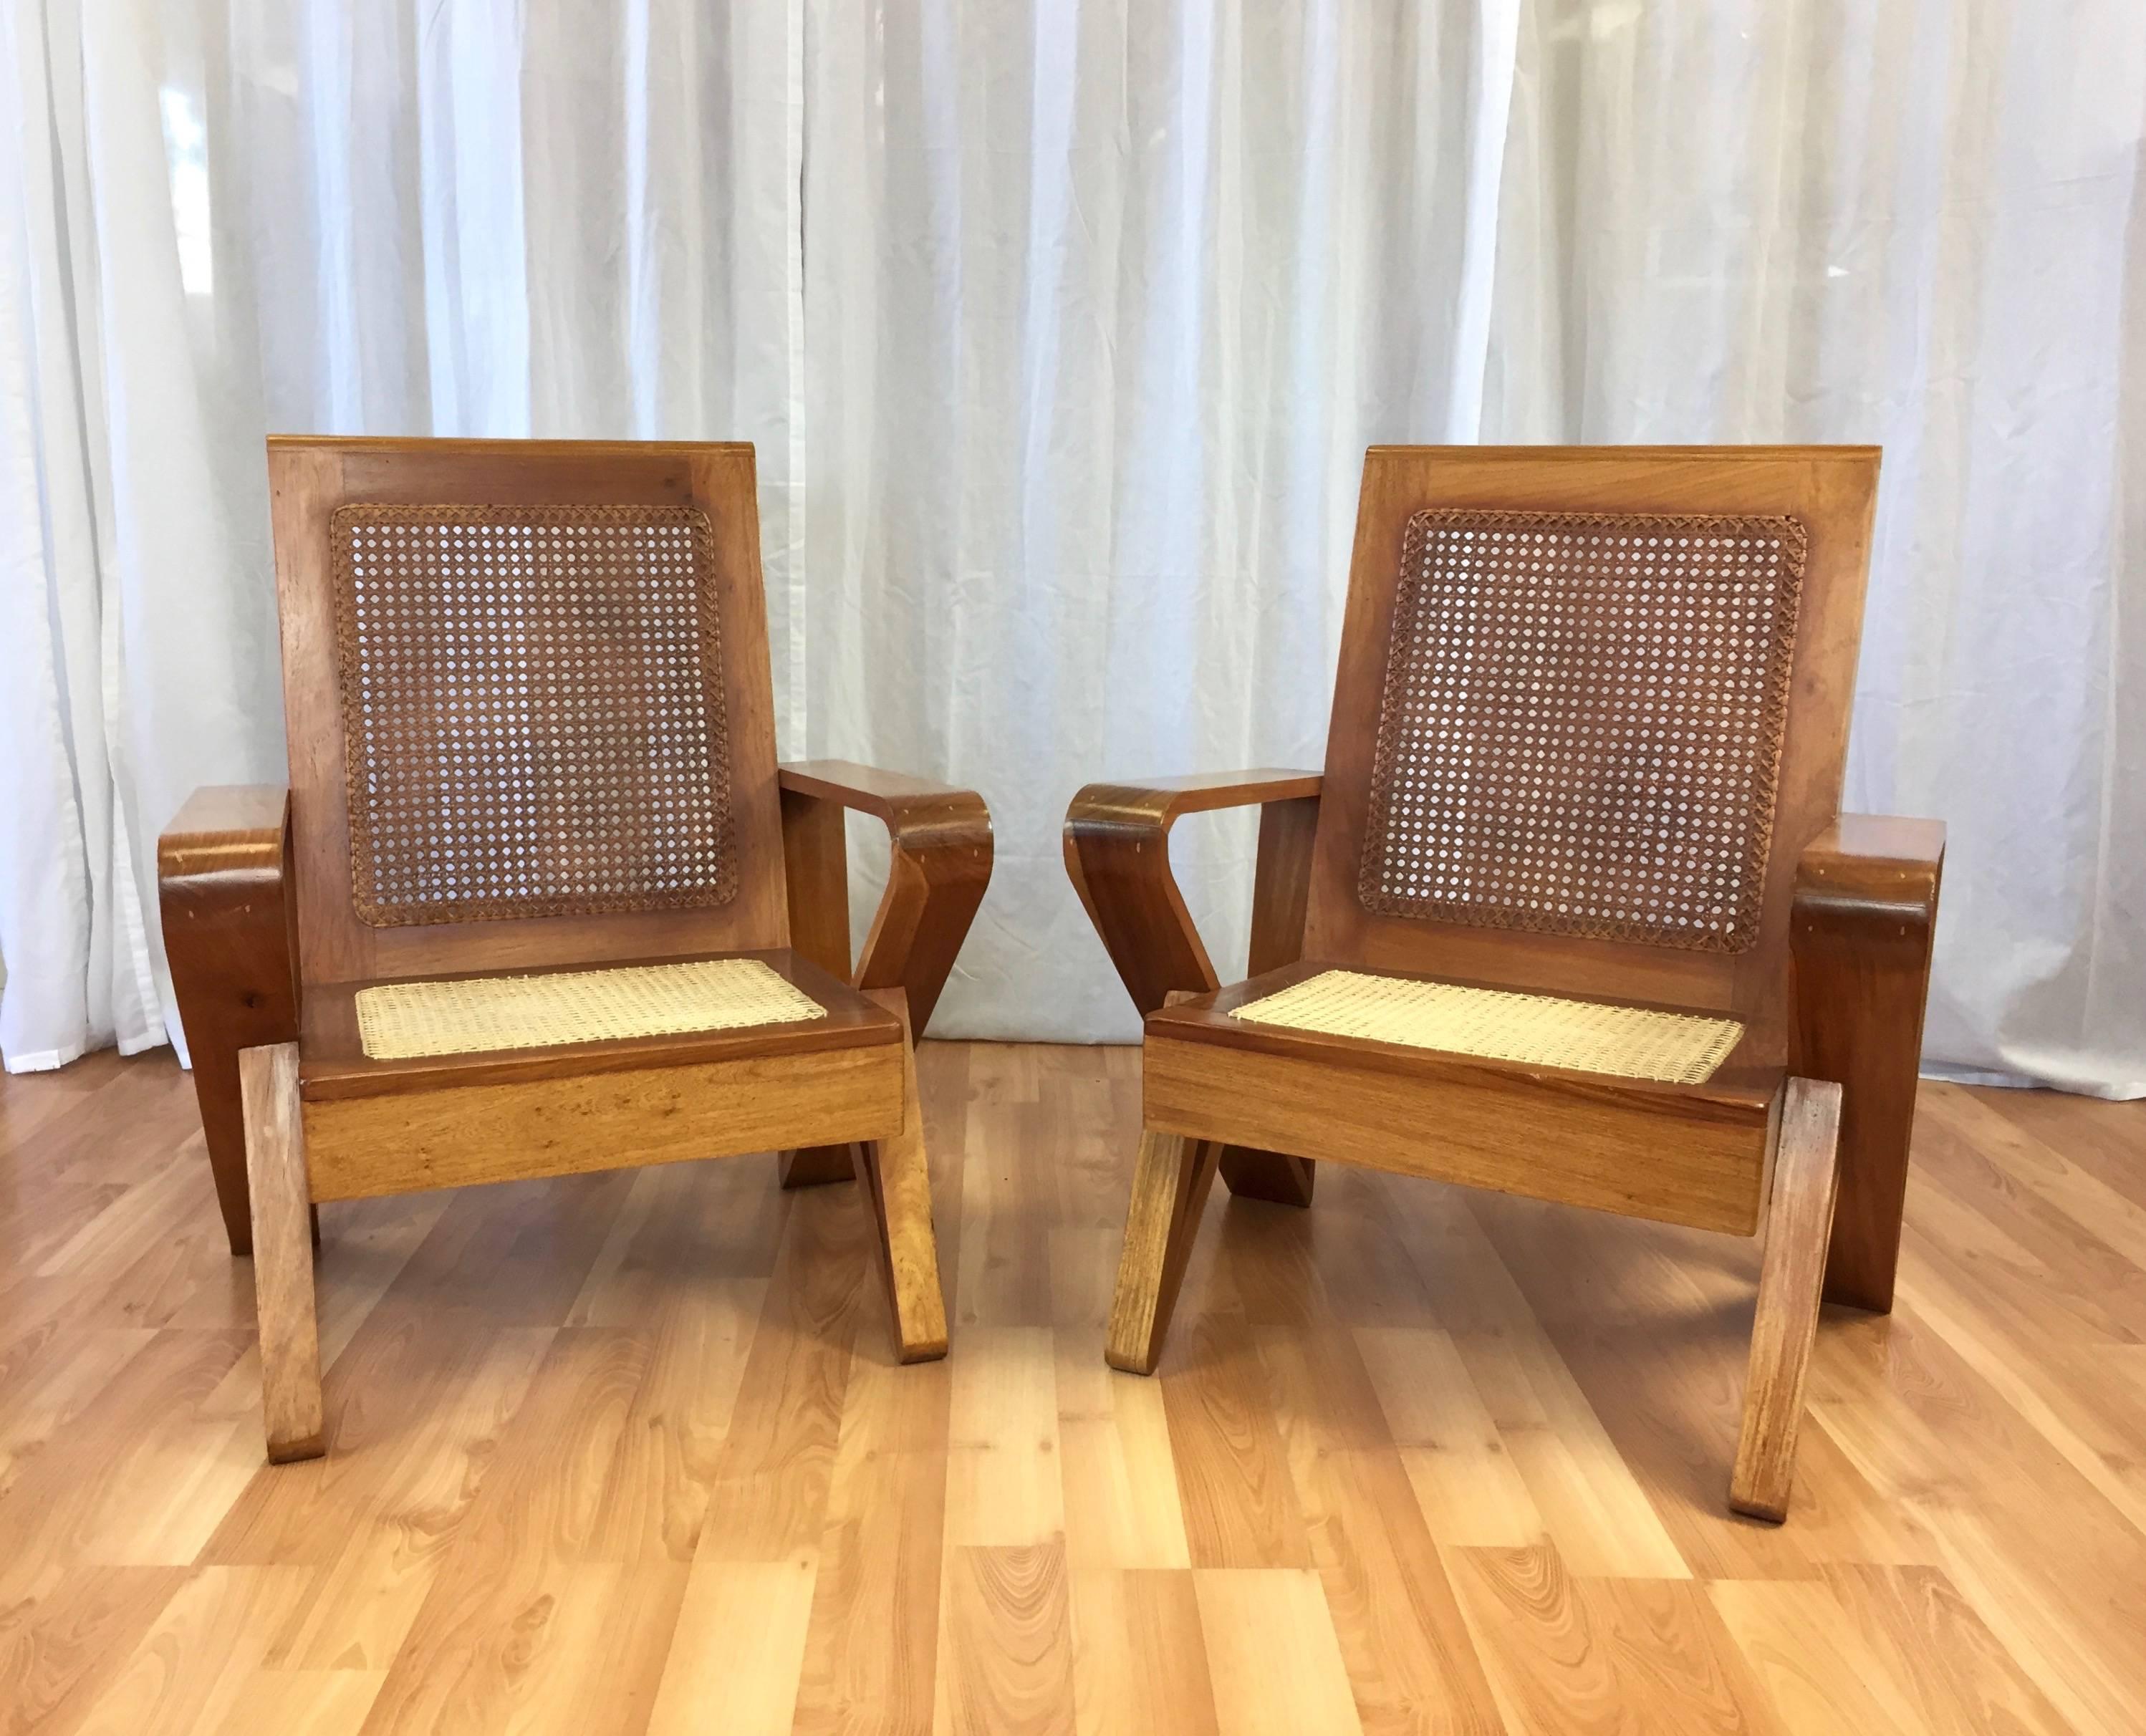 A stately pair of uncommon Hawaiian lounge chairs in solid koa wood with woven cane seats and backs.

Fantastic lines on these circa 1940s low lounge chairs, with a thoroughly modern geometric design to their arms and legs. Displays warm and rich